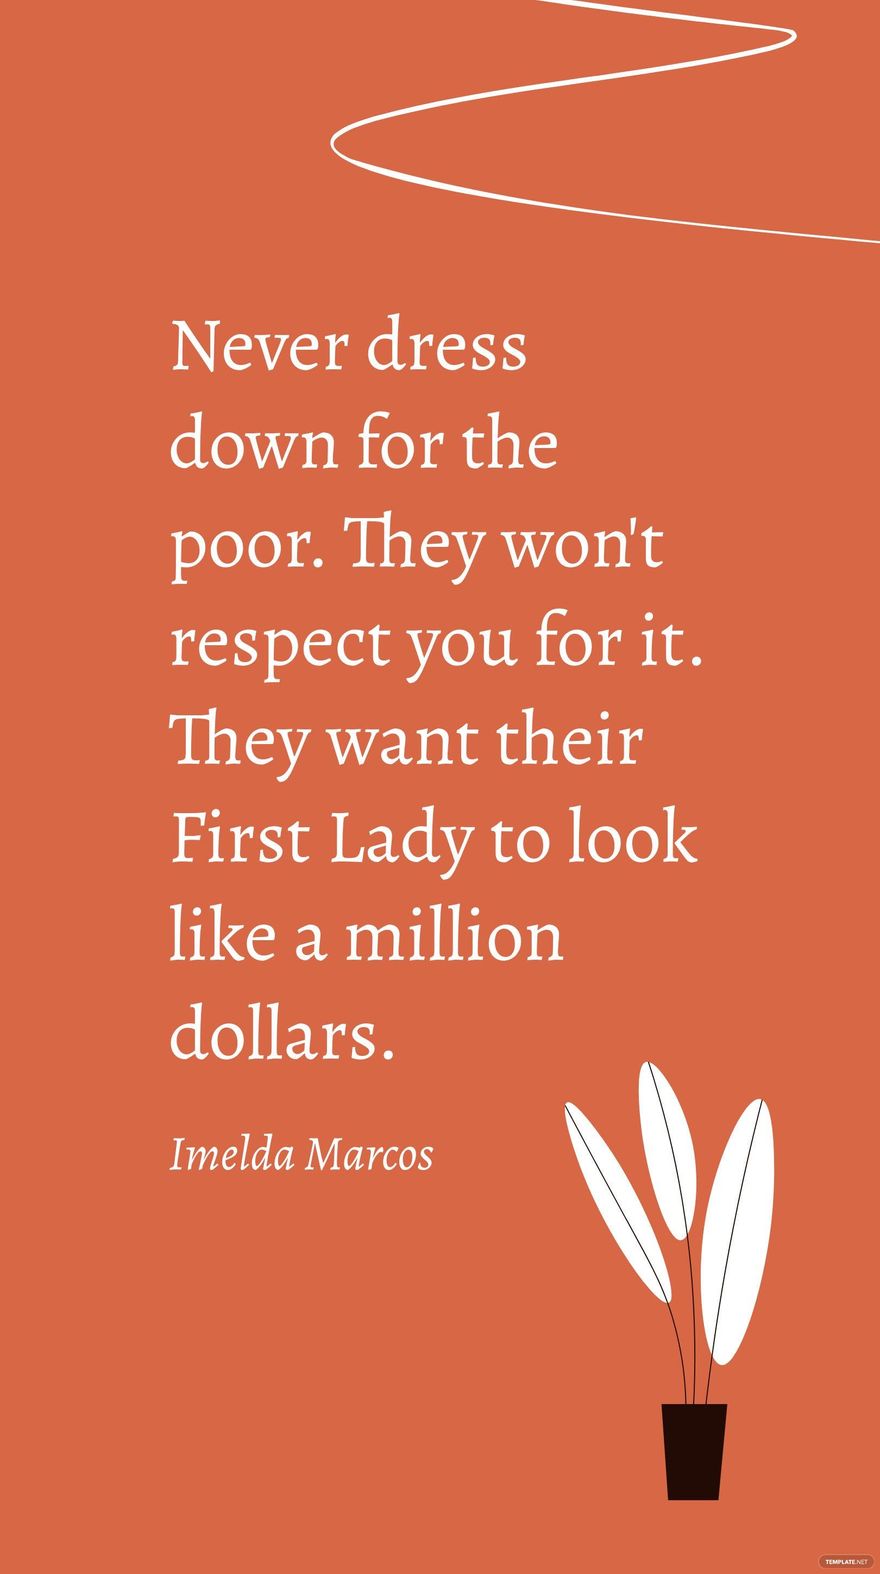 Imelda Marcos- Never dress down for the poor. They won't respect you for it. They want their First Lady to look like a million dollars.